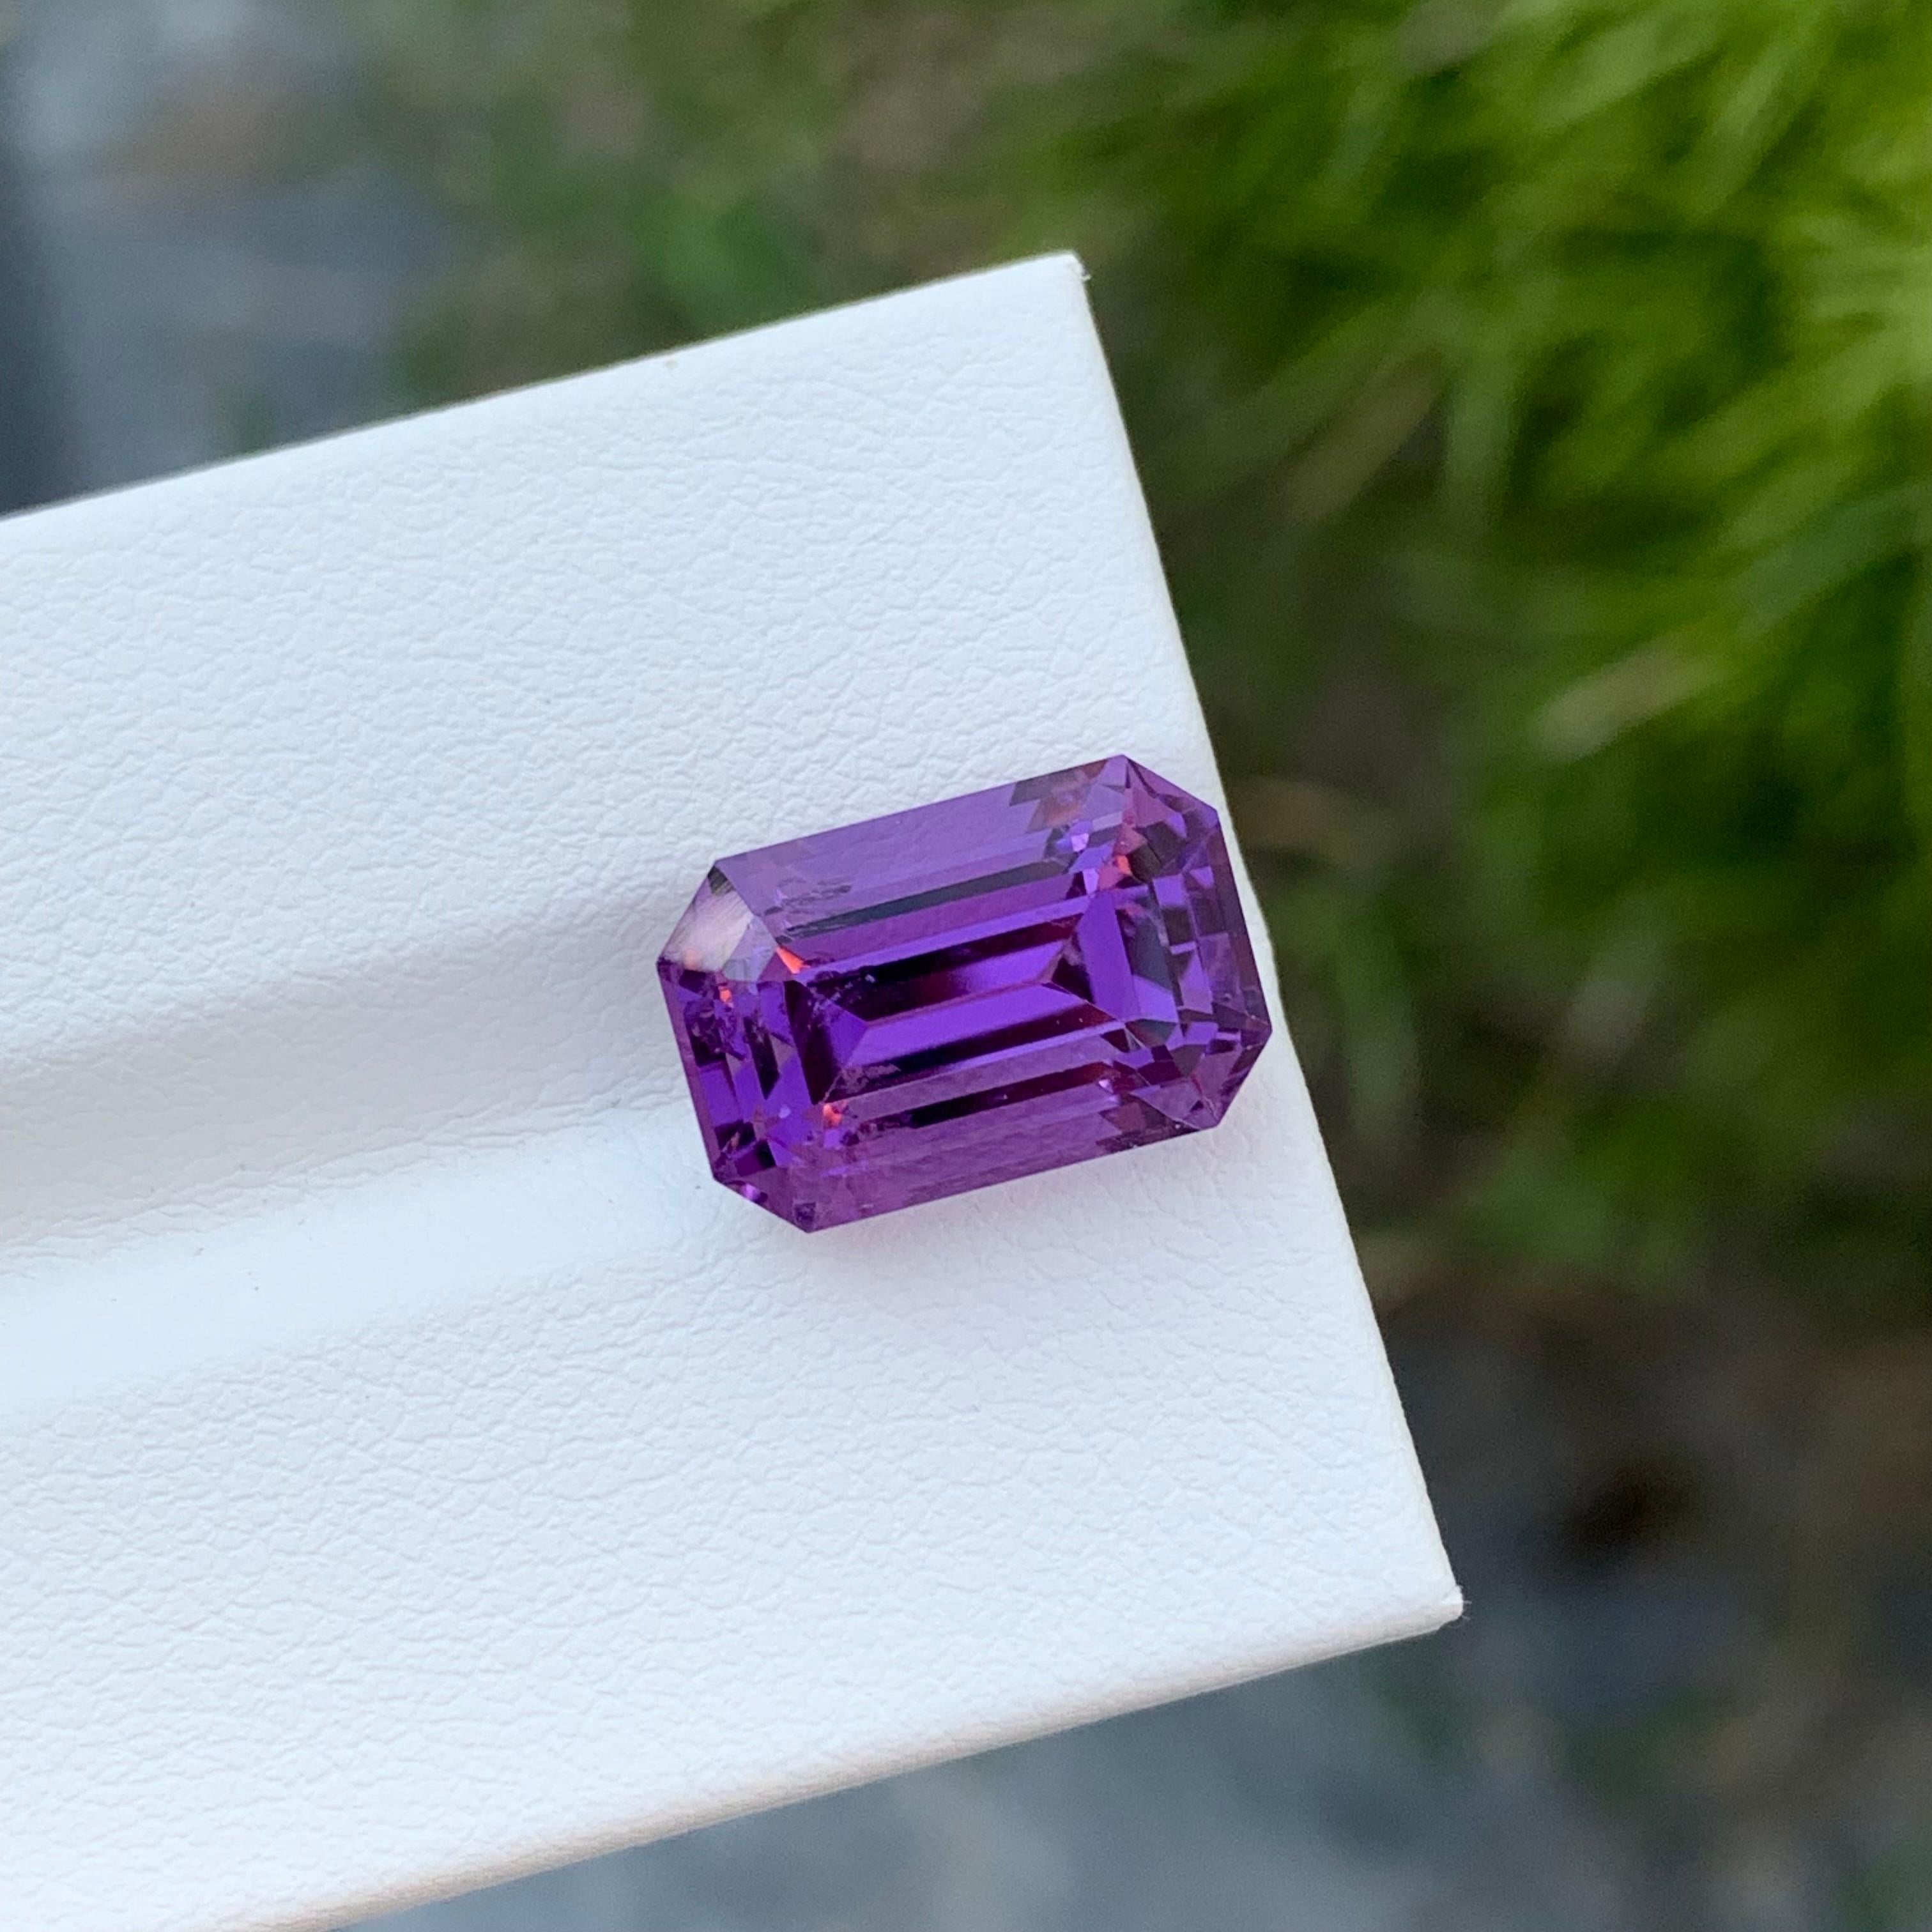 Loose Amethyst
Weight: 6.95 Carats
Dimension: 13.2 x 8.7 x 8.2 Mm
Colour: Purple
Origin: Brazil
Treatment: Non
Certificate: On Demand
Shape: Emerald 

Amethyst, a stunning variety of quartz known for its mesmerizing purple hue, has captivated humans